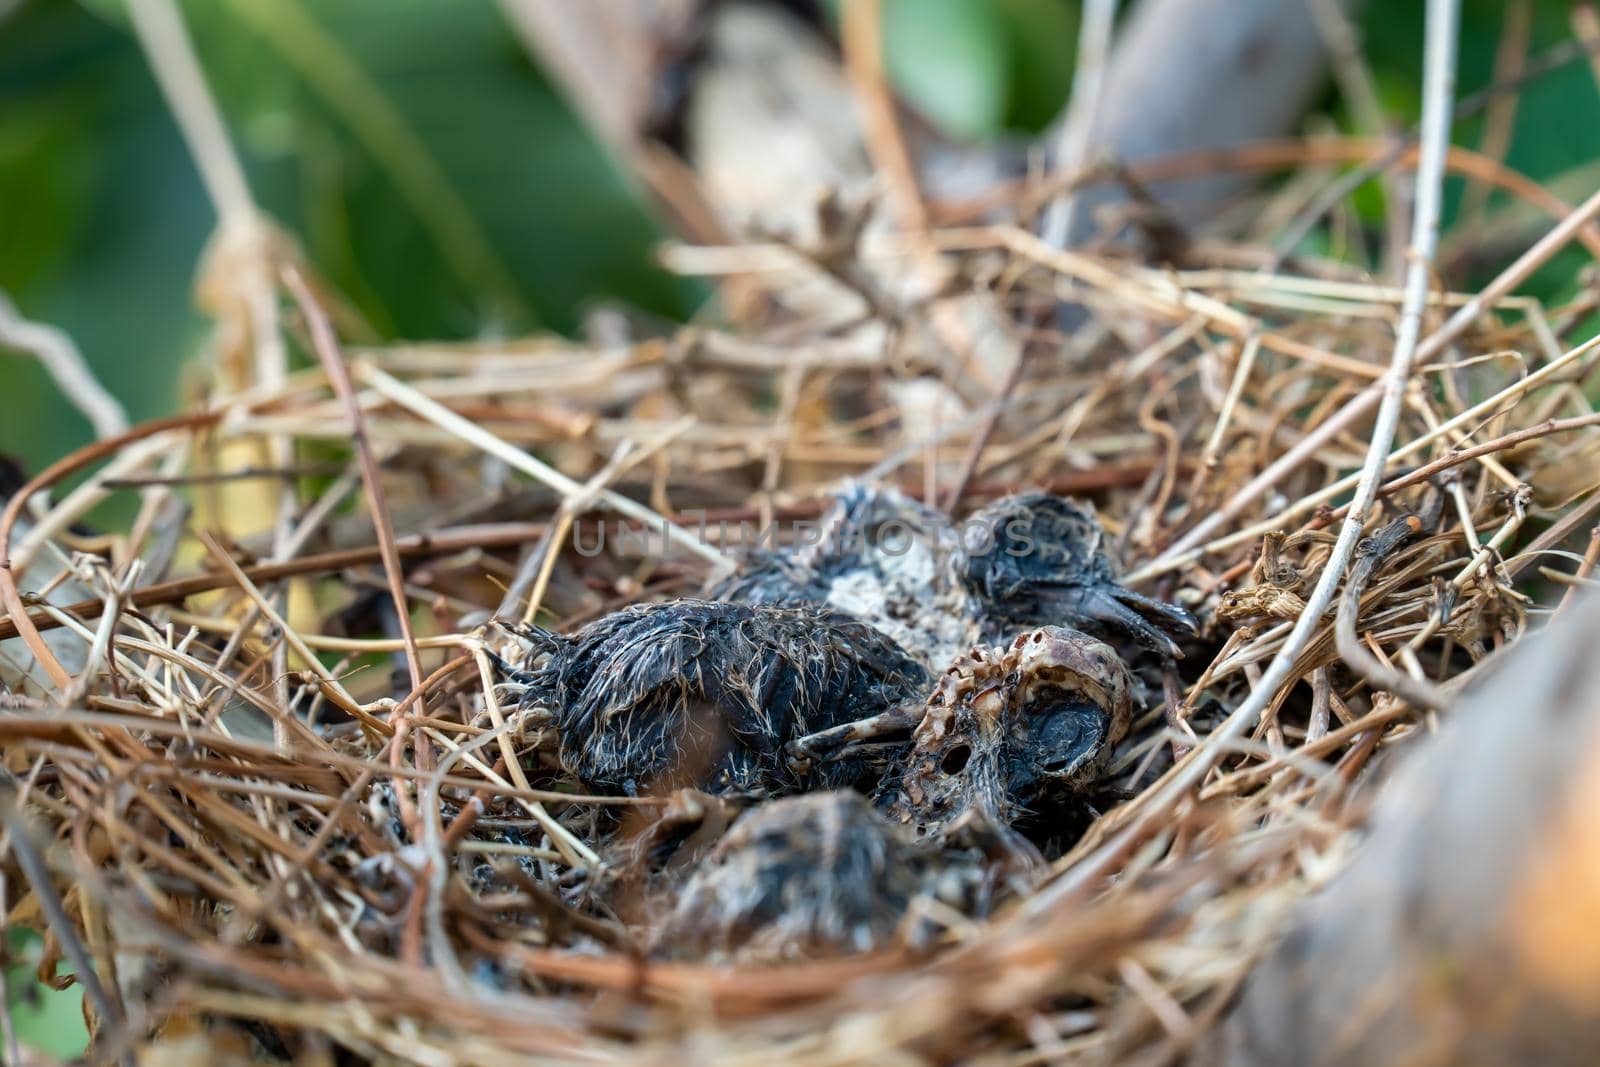 The remains of the baby bird died inside its nest. by chiawth